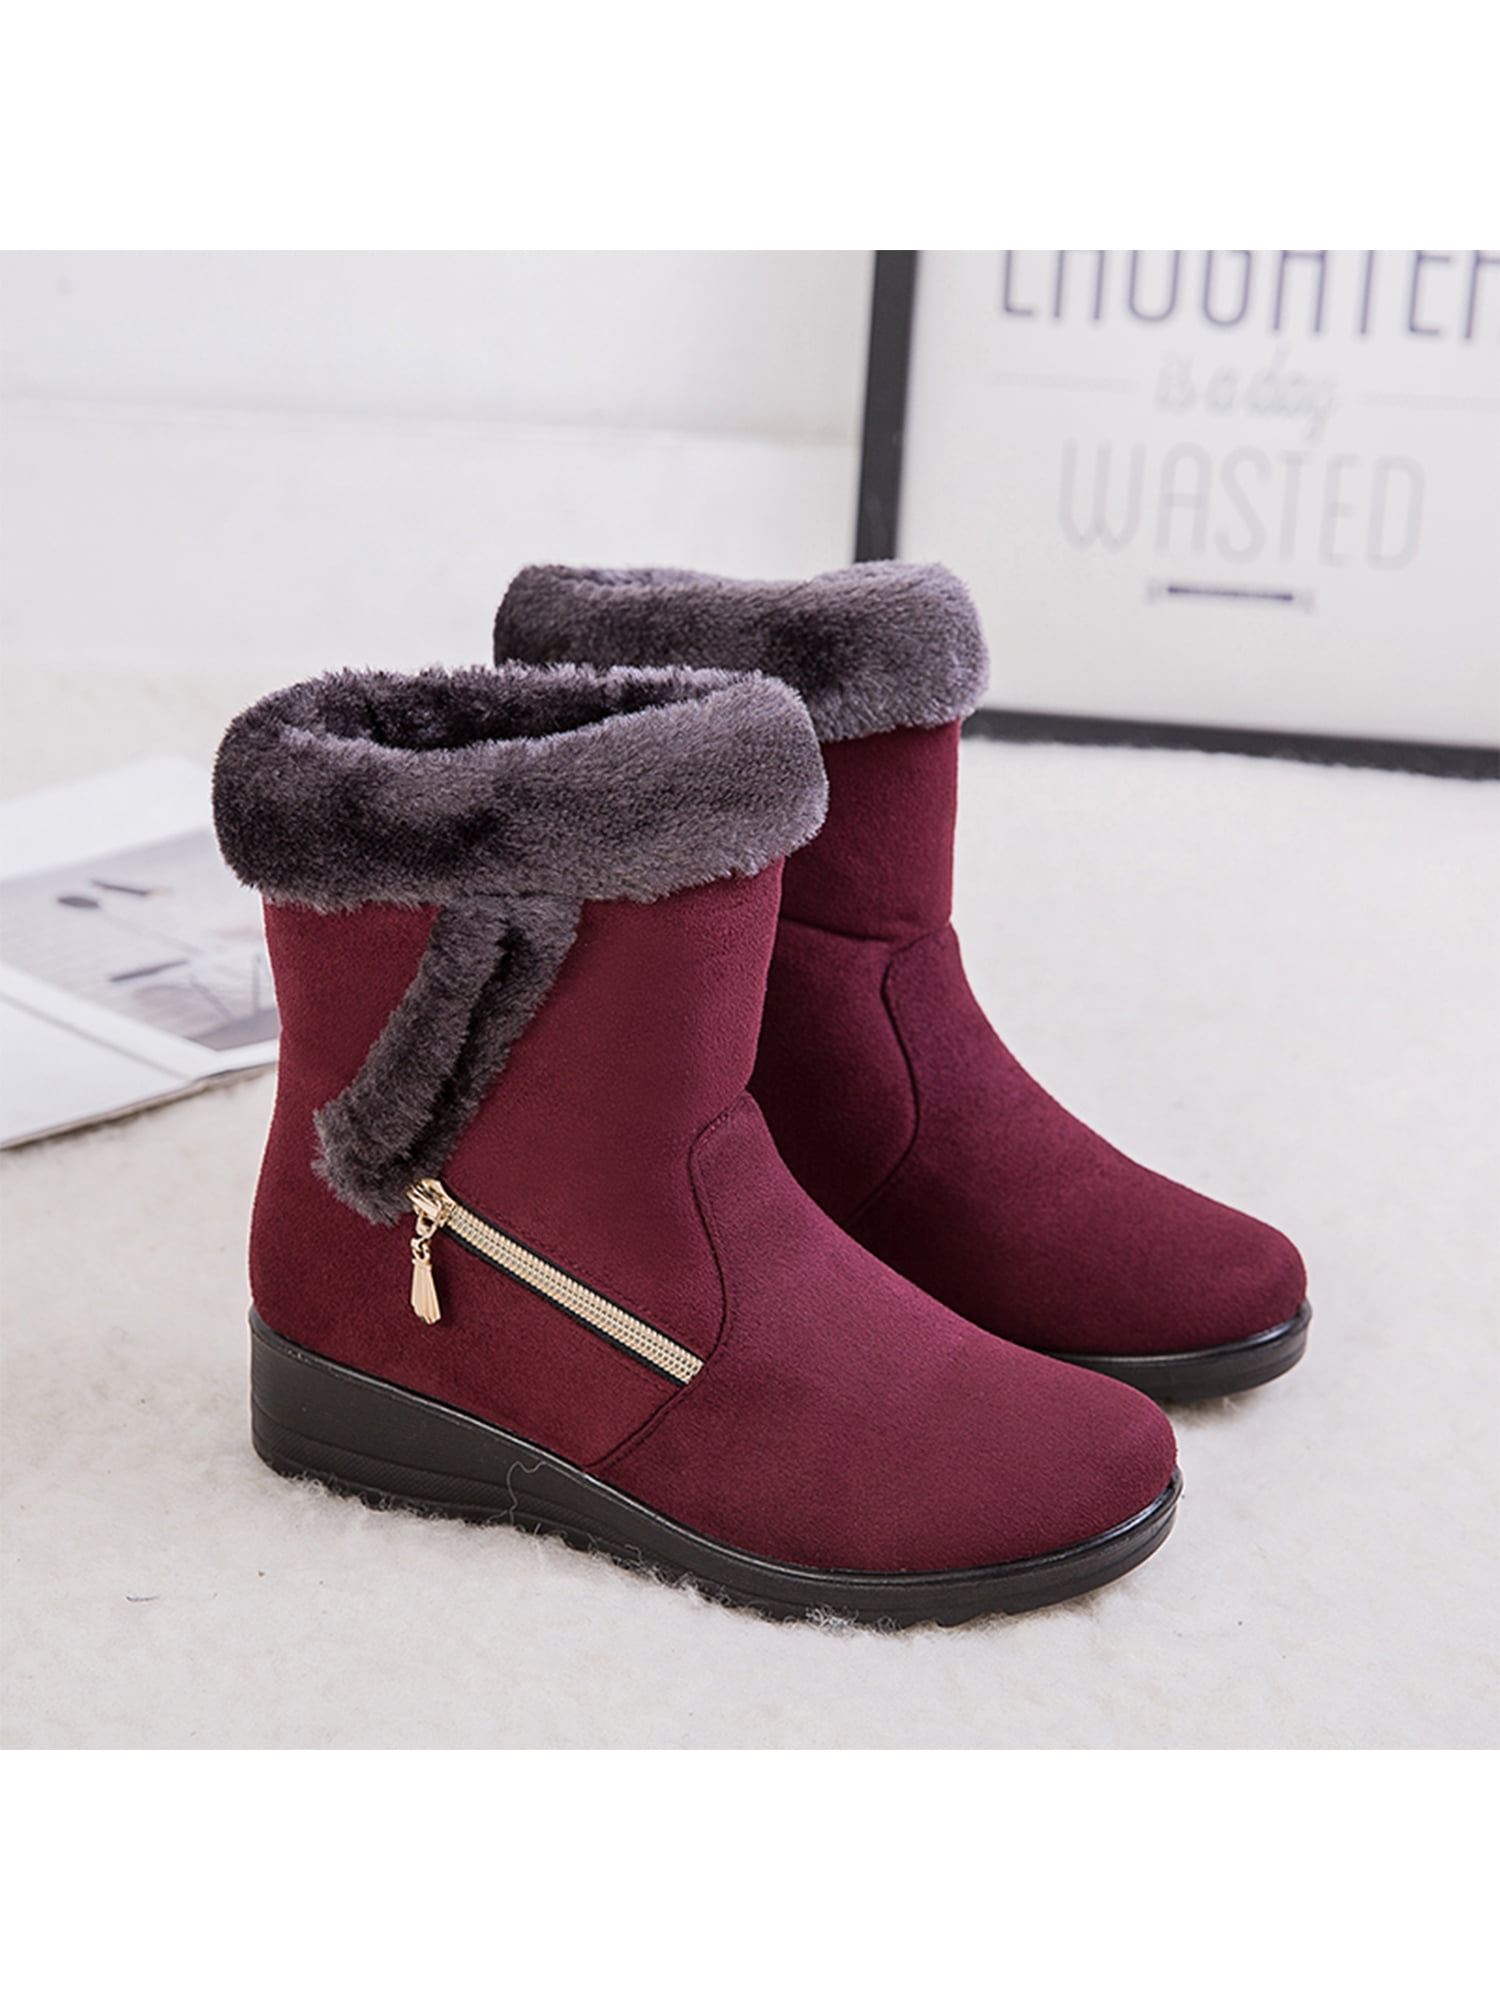 Women Casual Round Toe Ankle Boots Ladies Comfy Winter Warm Fur Lined Shoes US